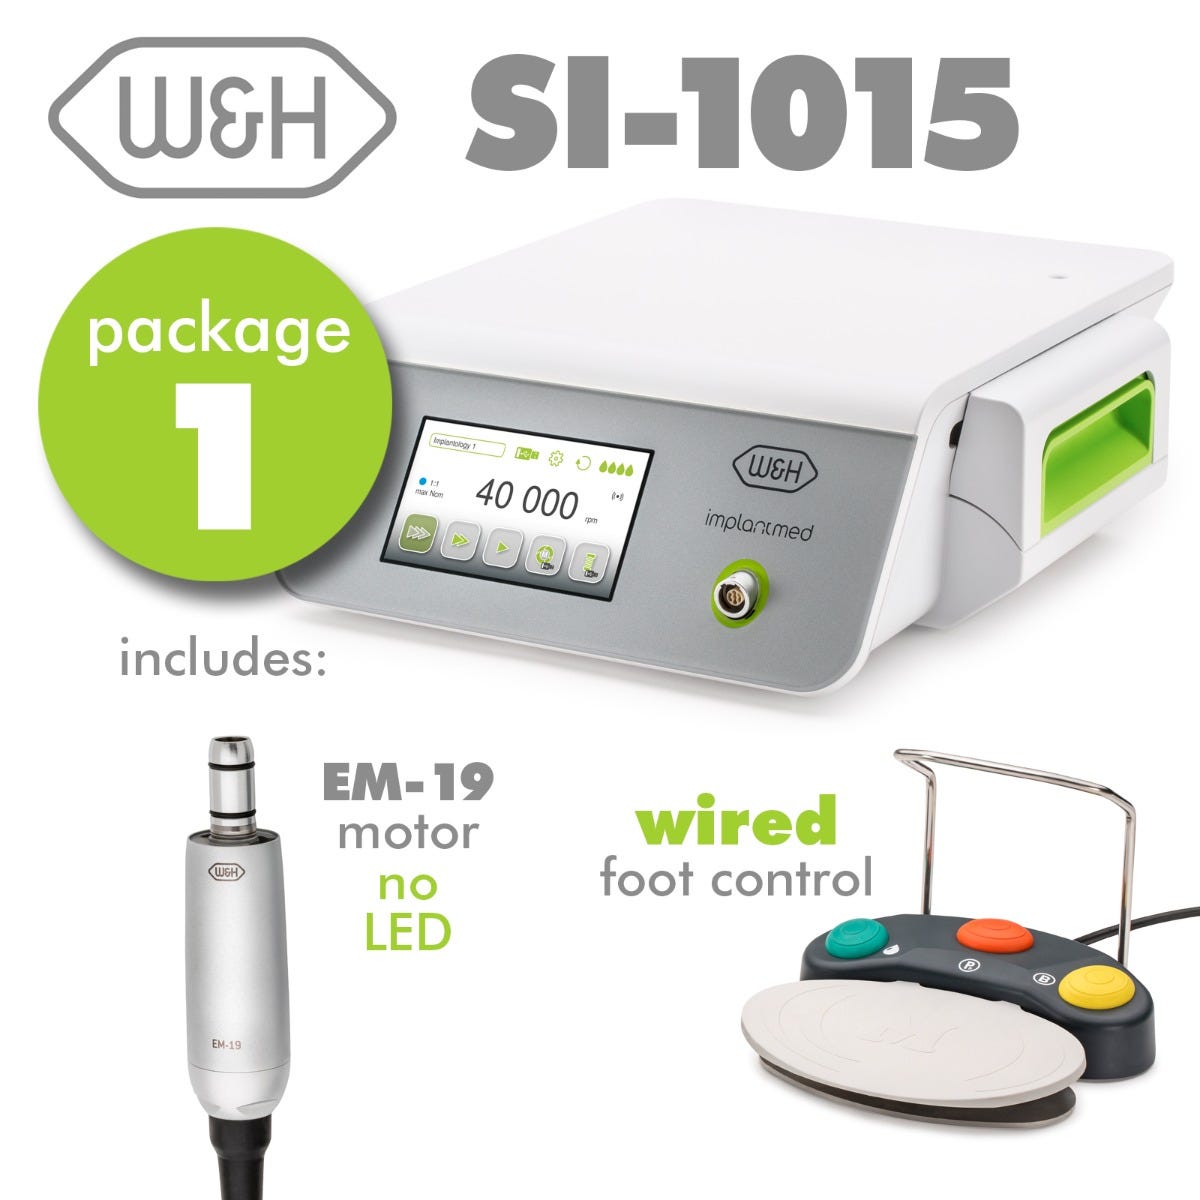 Implantmed Plus Set 1- Includes: SI-1015 Control Unit, EM-19 Motor, Wired Foot Control